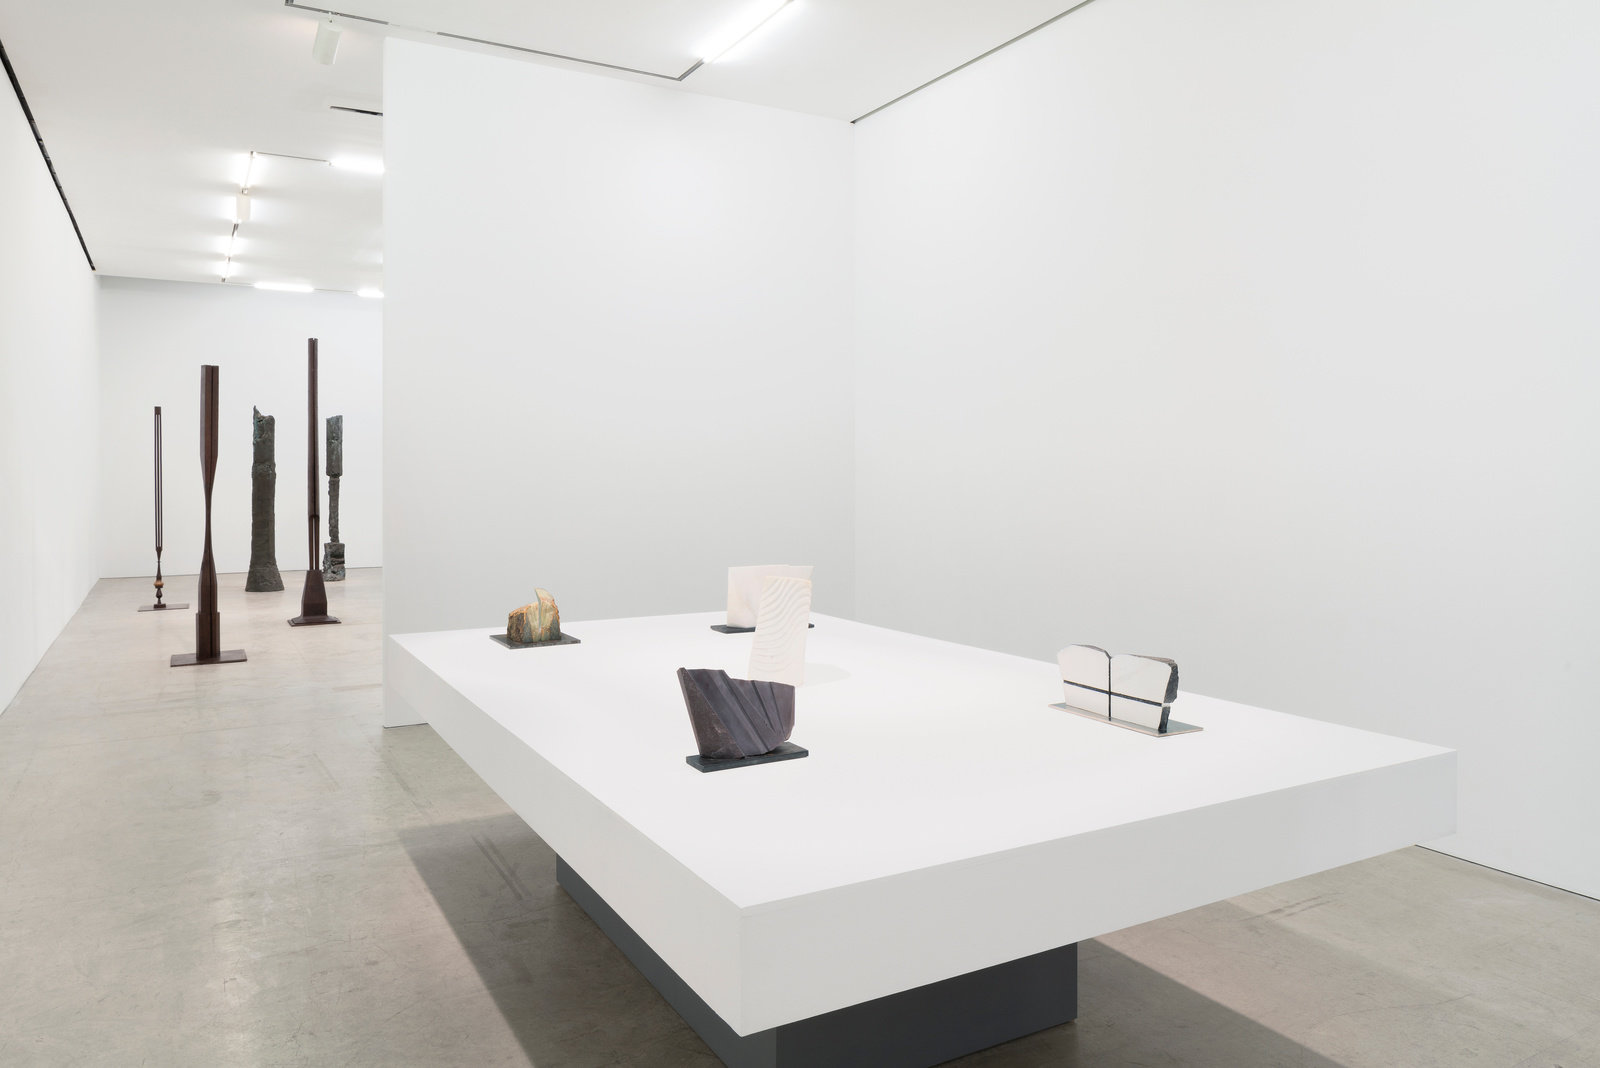 Beverly pepper, selected works 1968 2018, installation view 4 pierre le hors